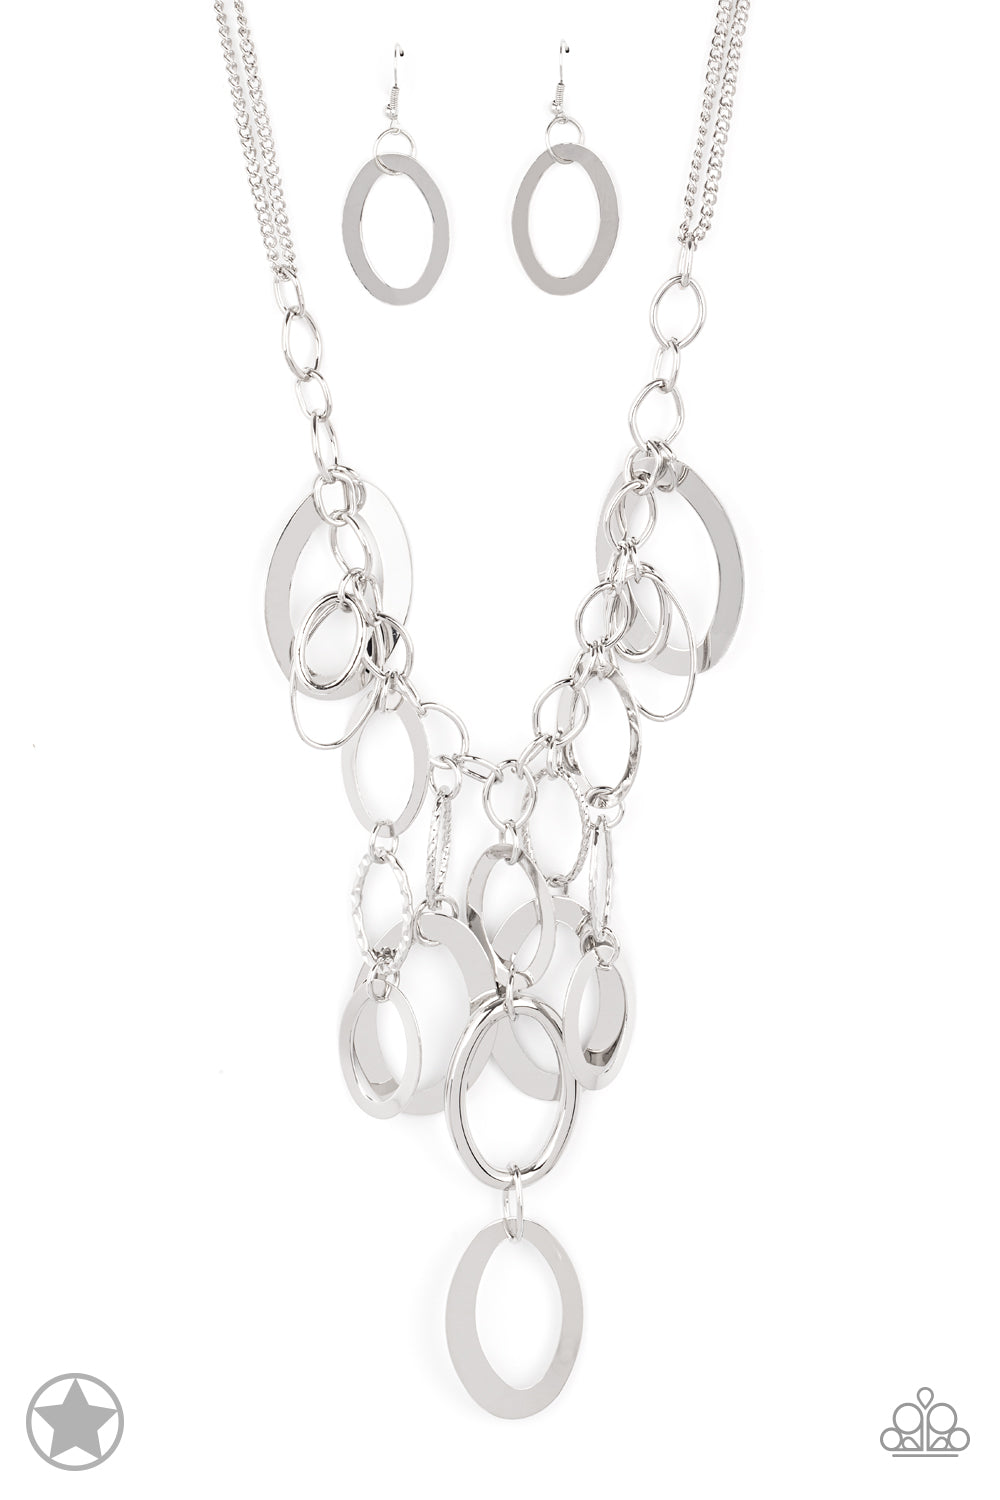 A Silver Spell - silver - Paparazzi necklace